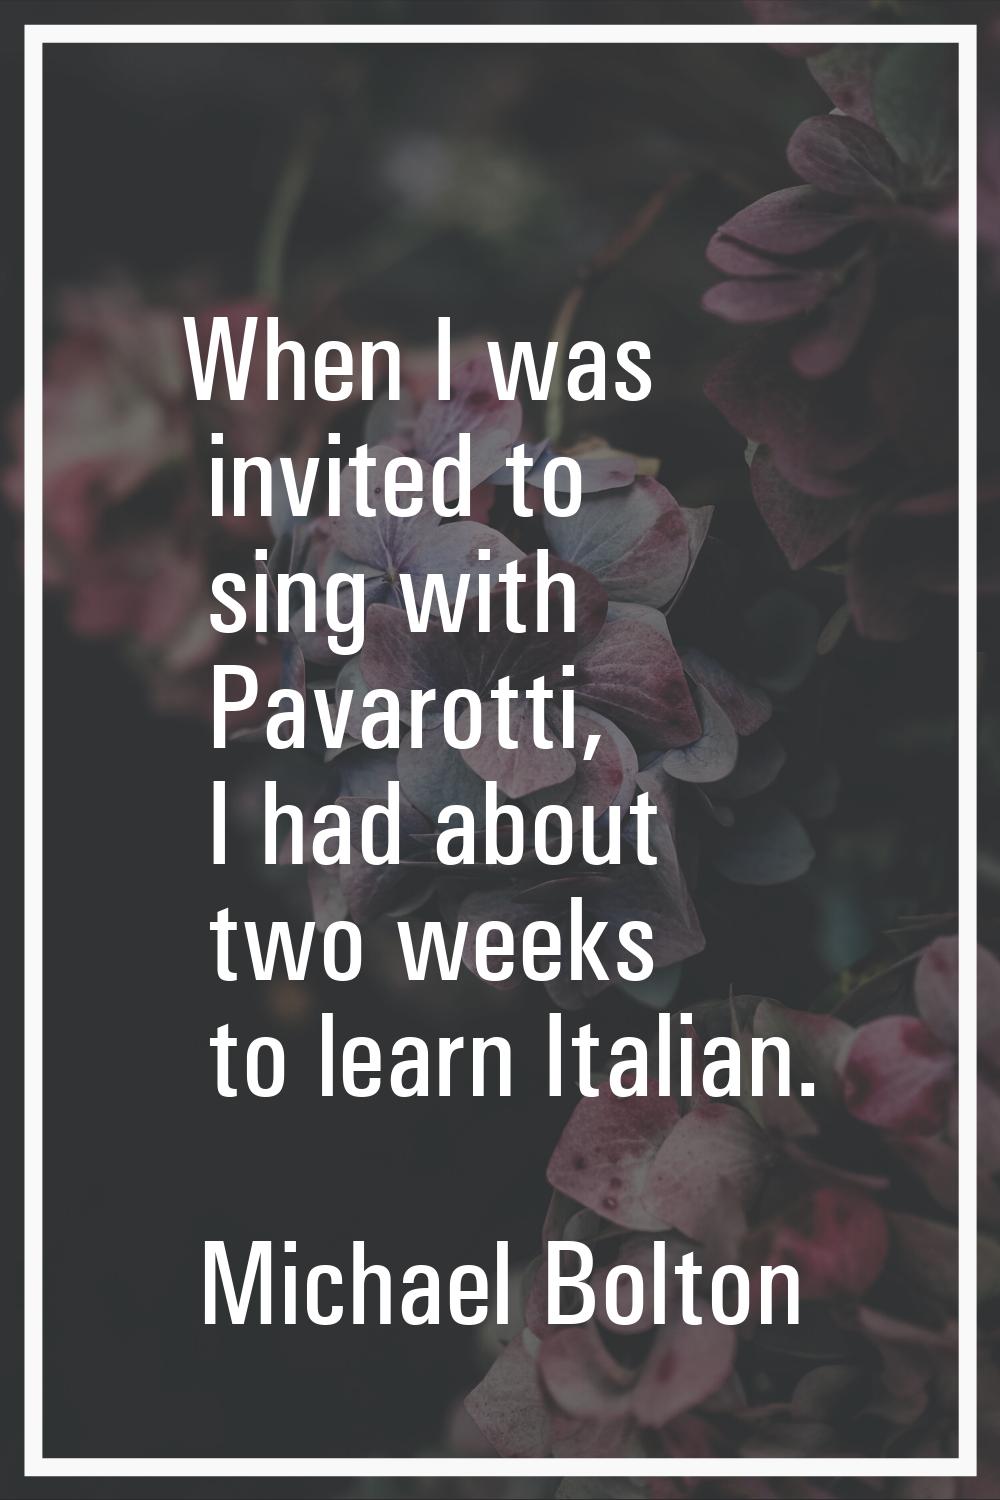 When I was invited to sing with Pavarotti, I had about two weeks to learn Italian.